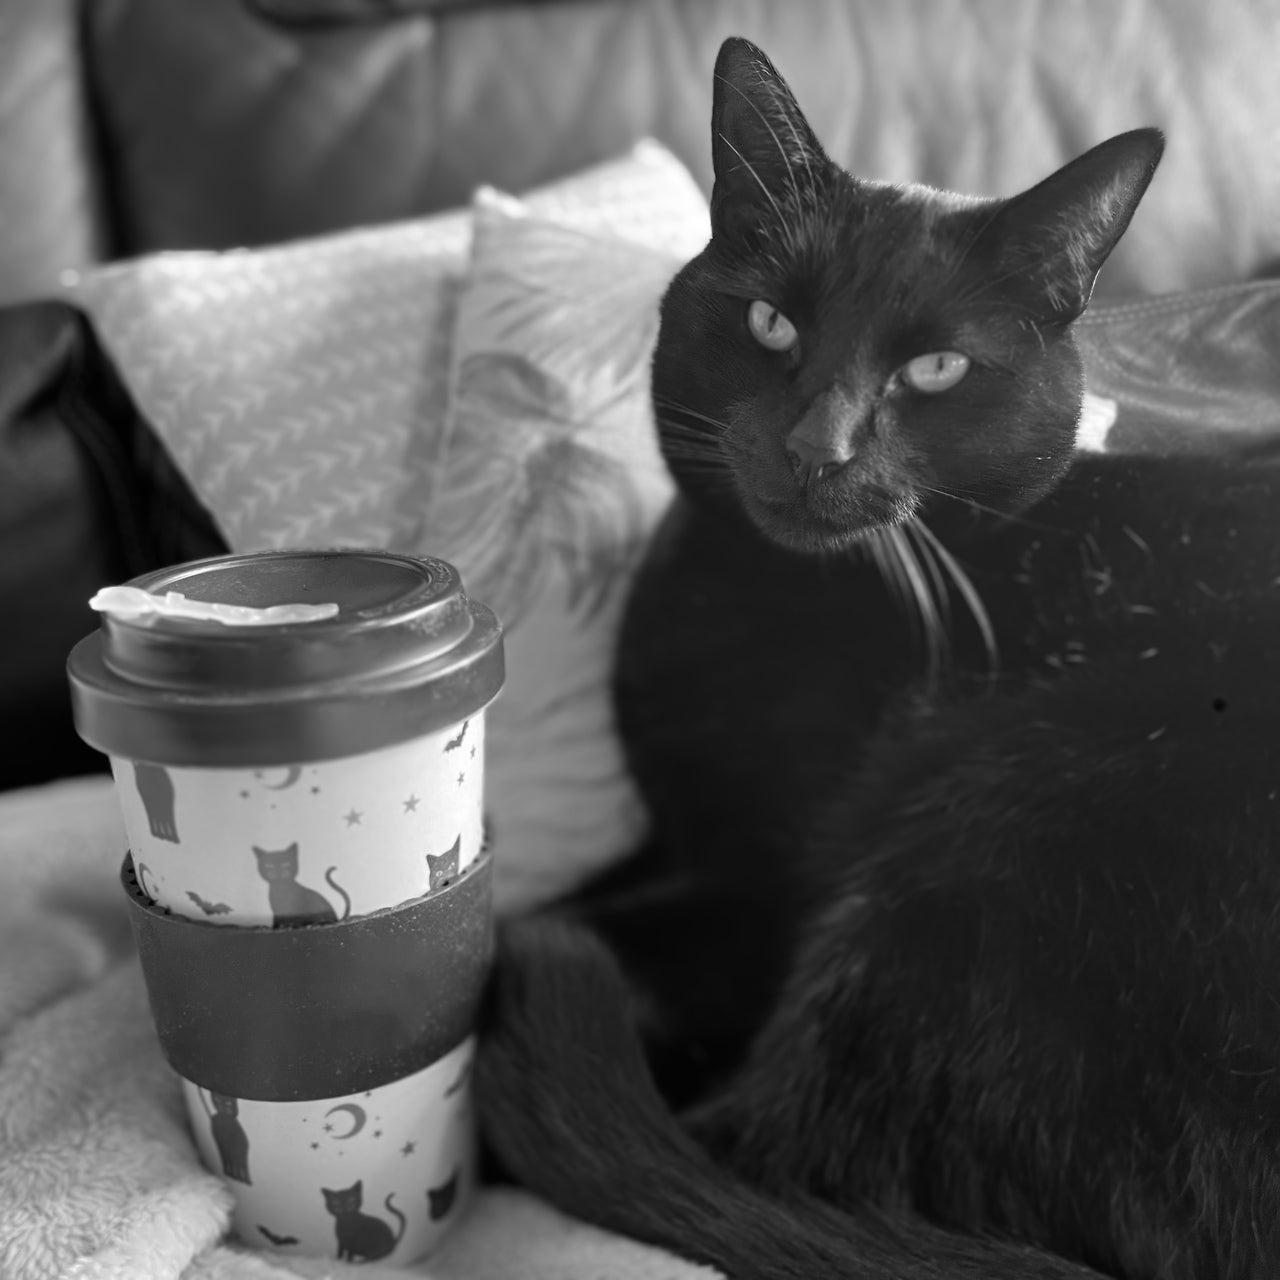 Travel coffee cup with black cats, bats and stars printed on it, sitting beside a black cat.